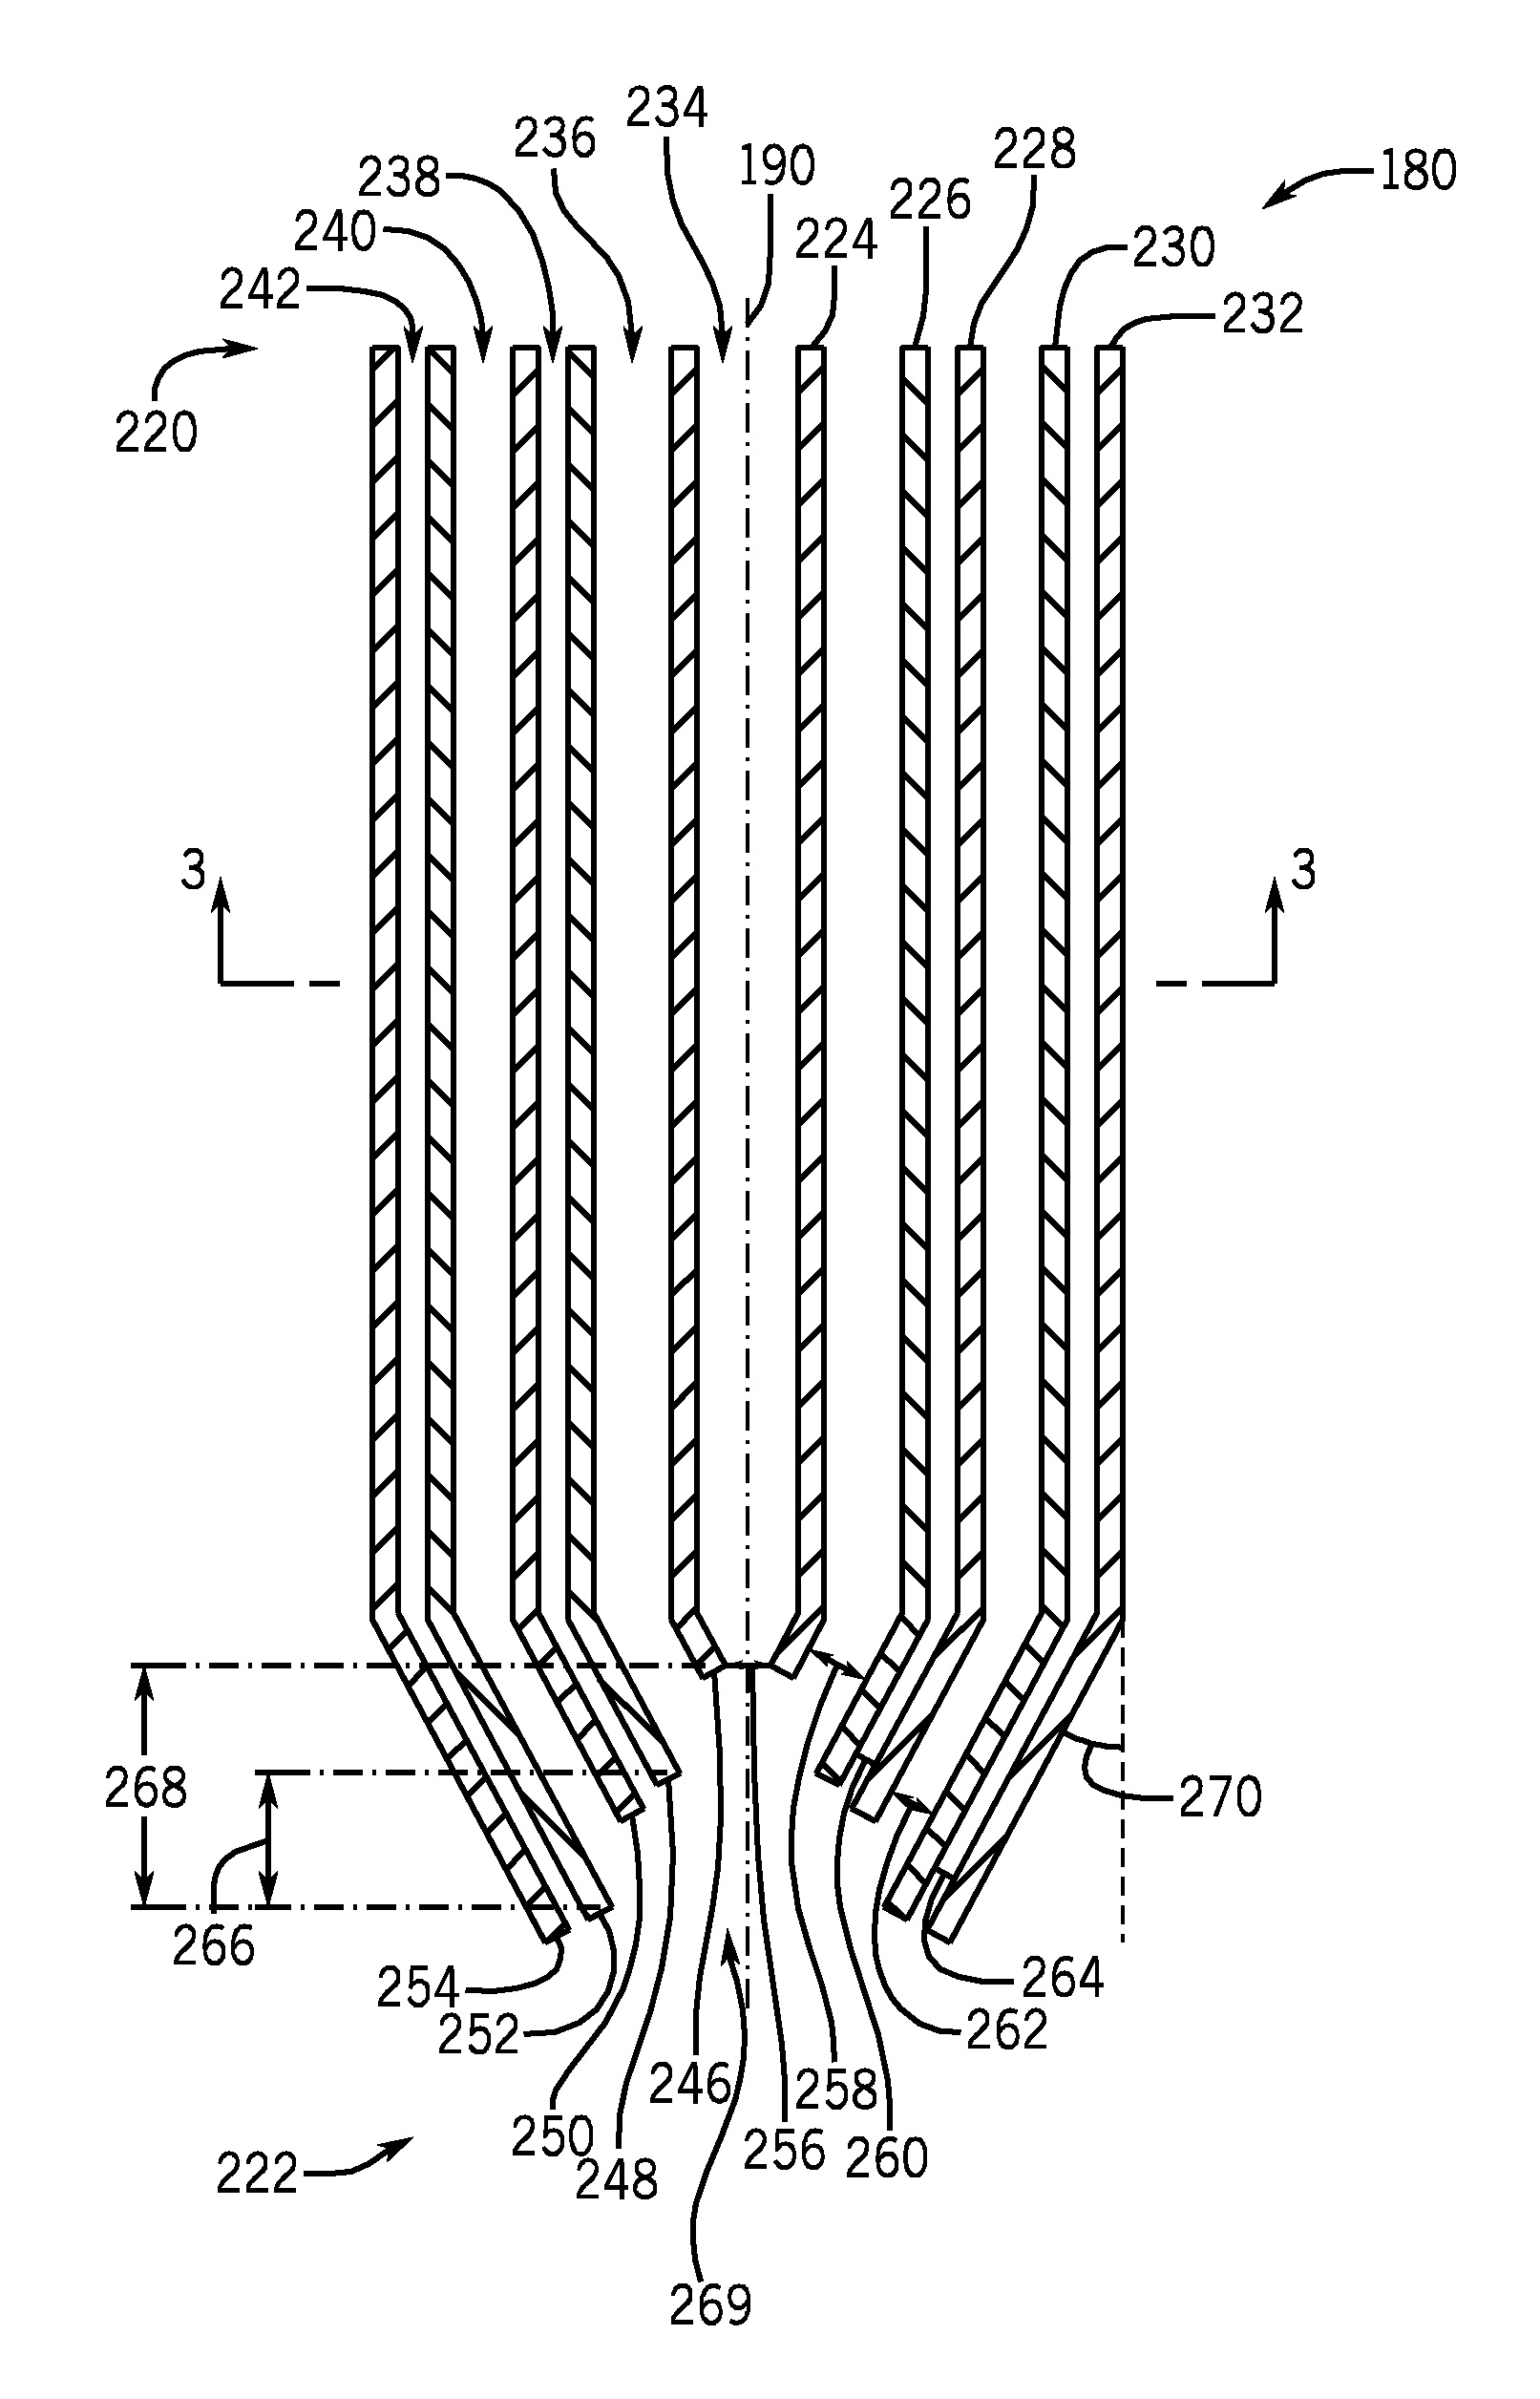 System for gasification fuel injection